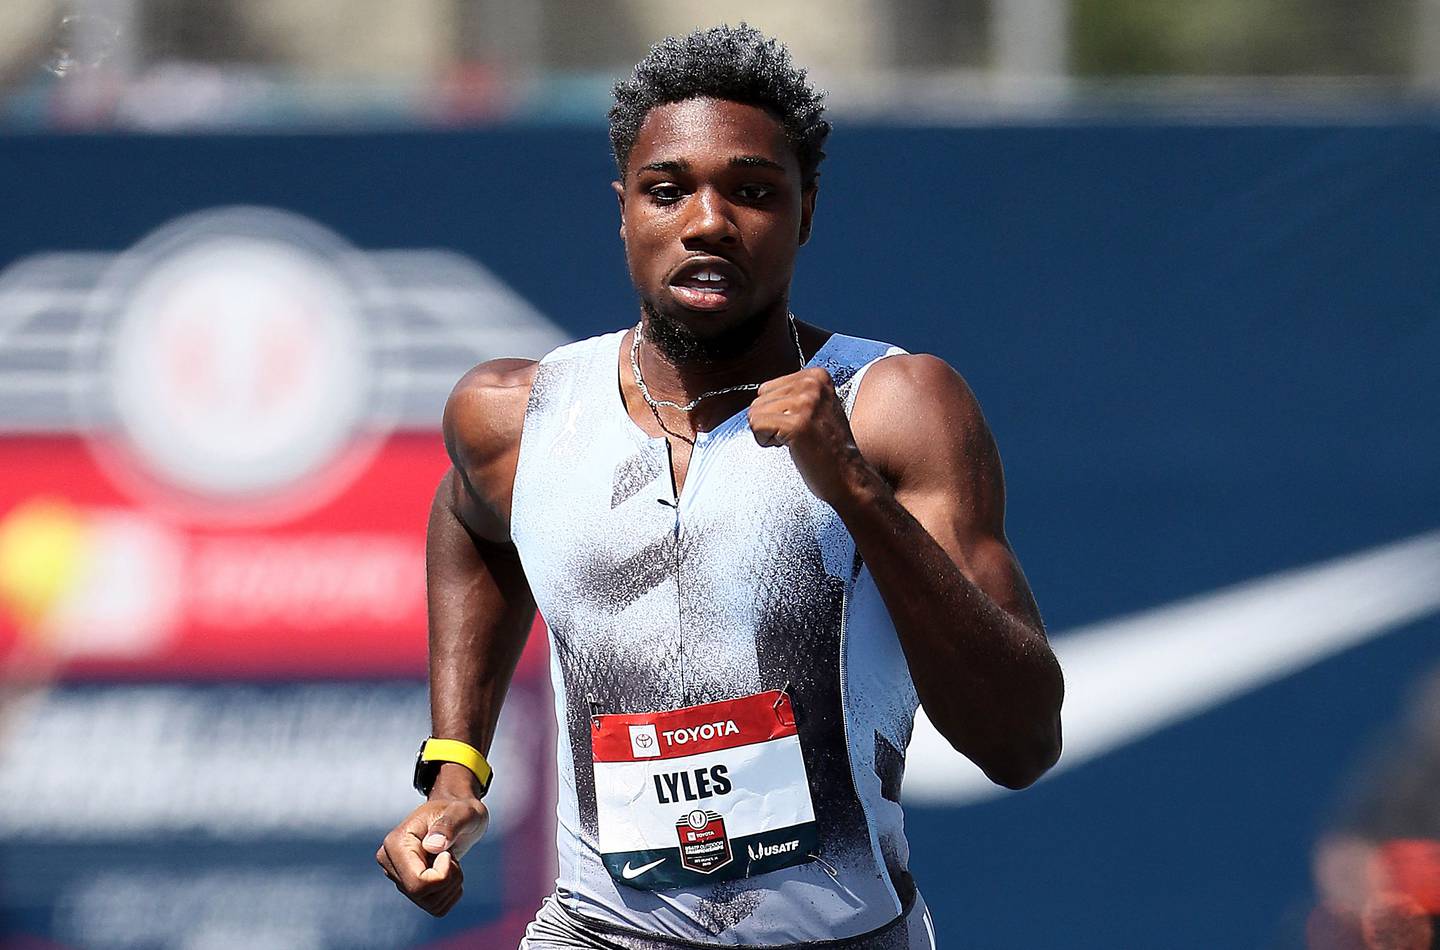 Noah Lyles is the favourite to win 200m gold